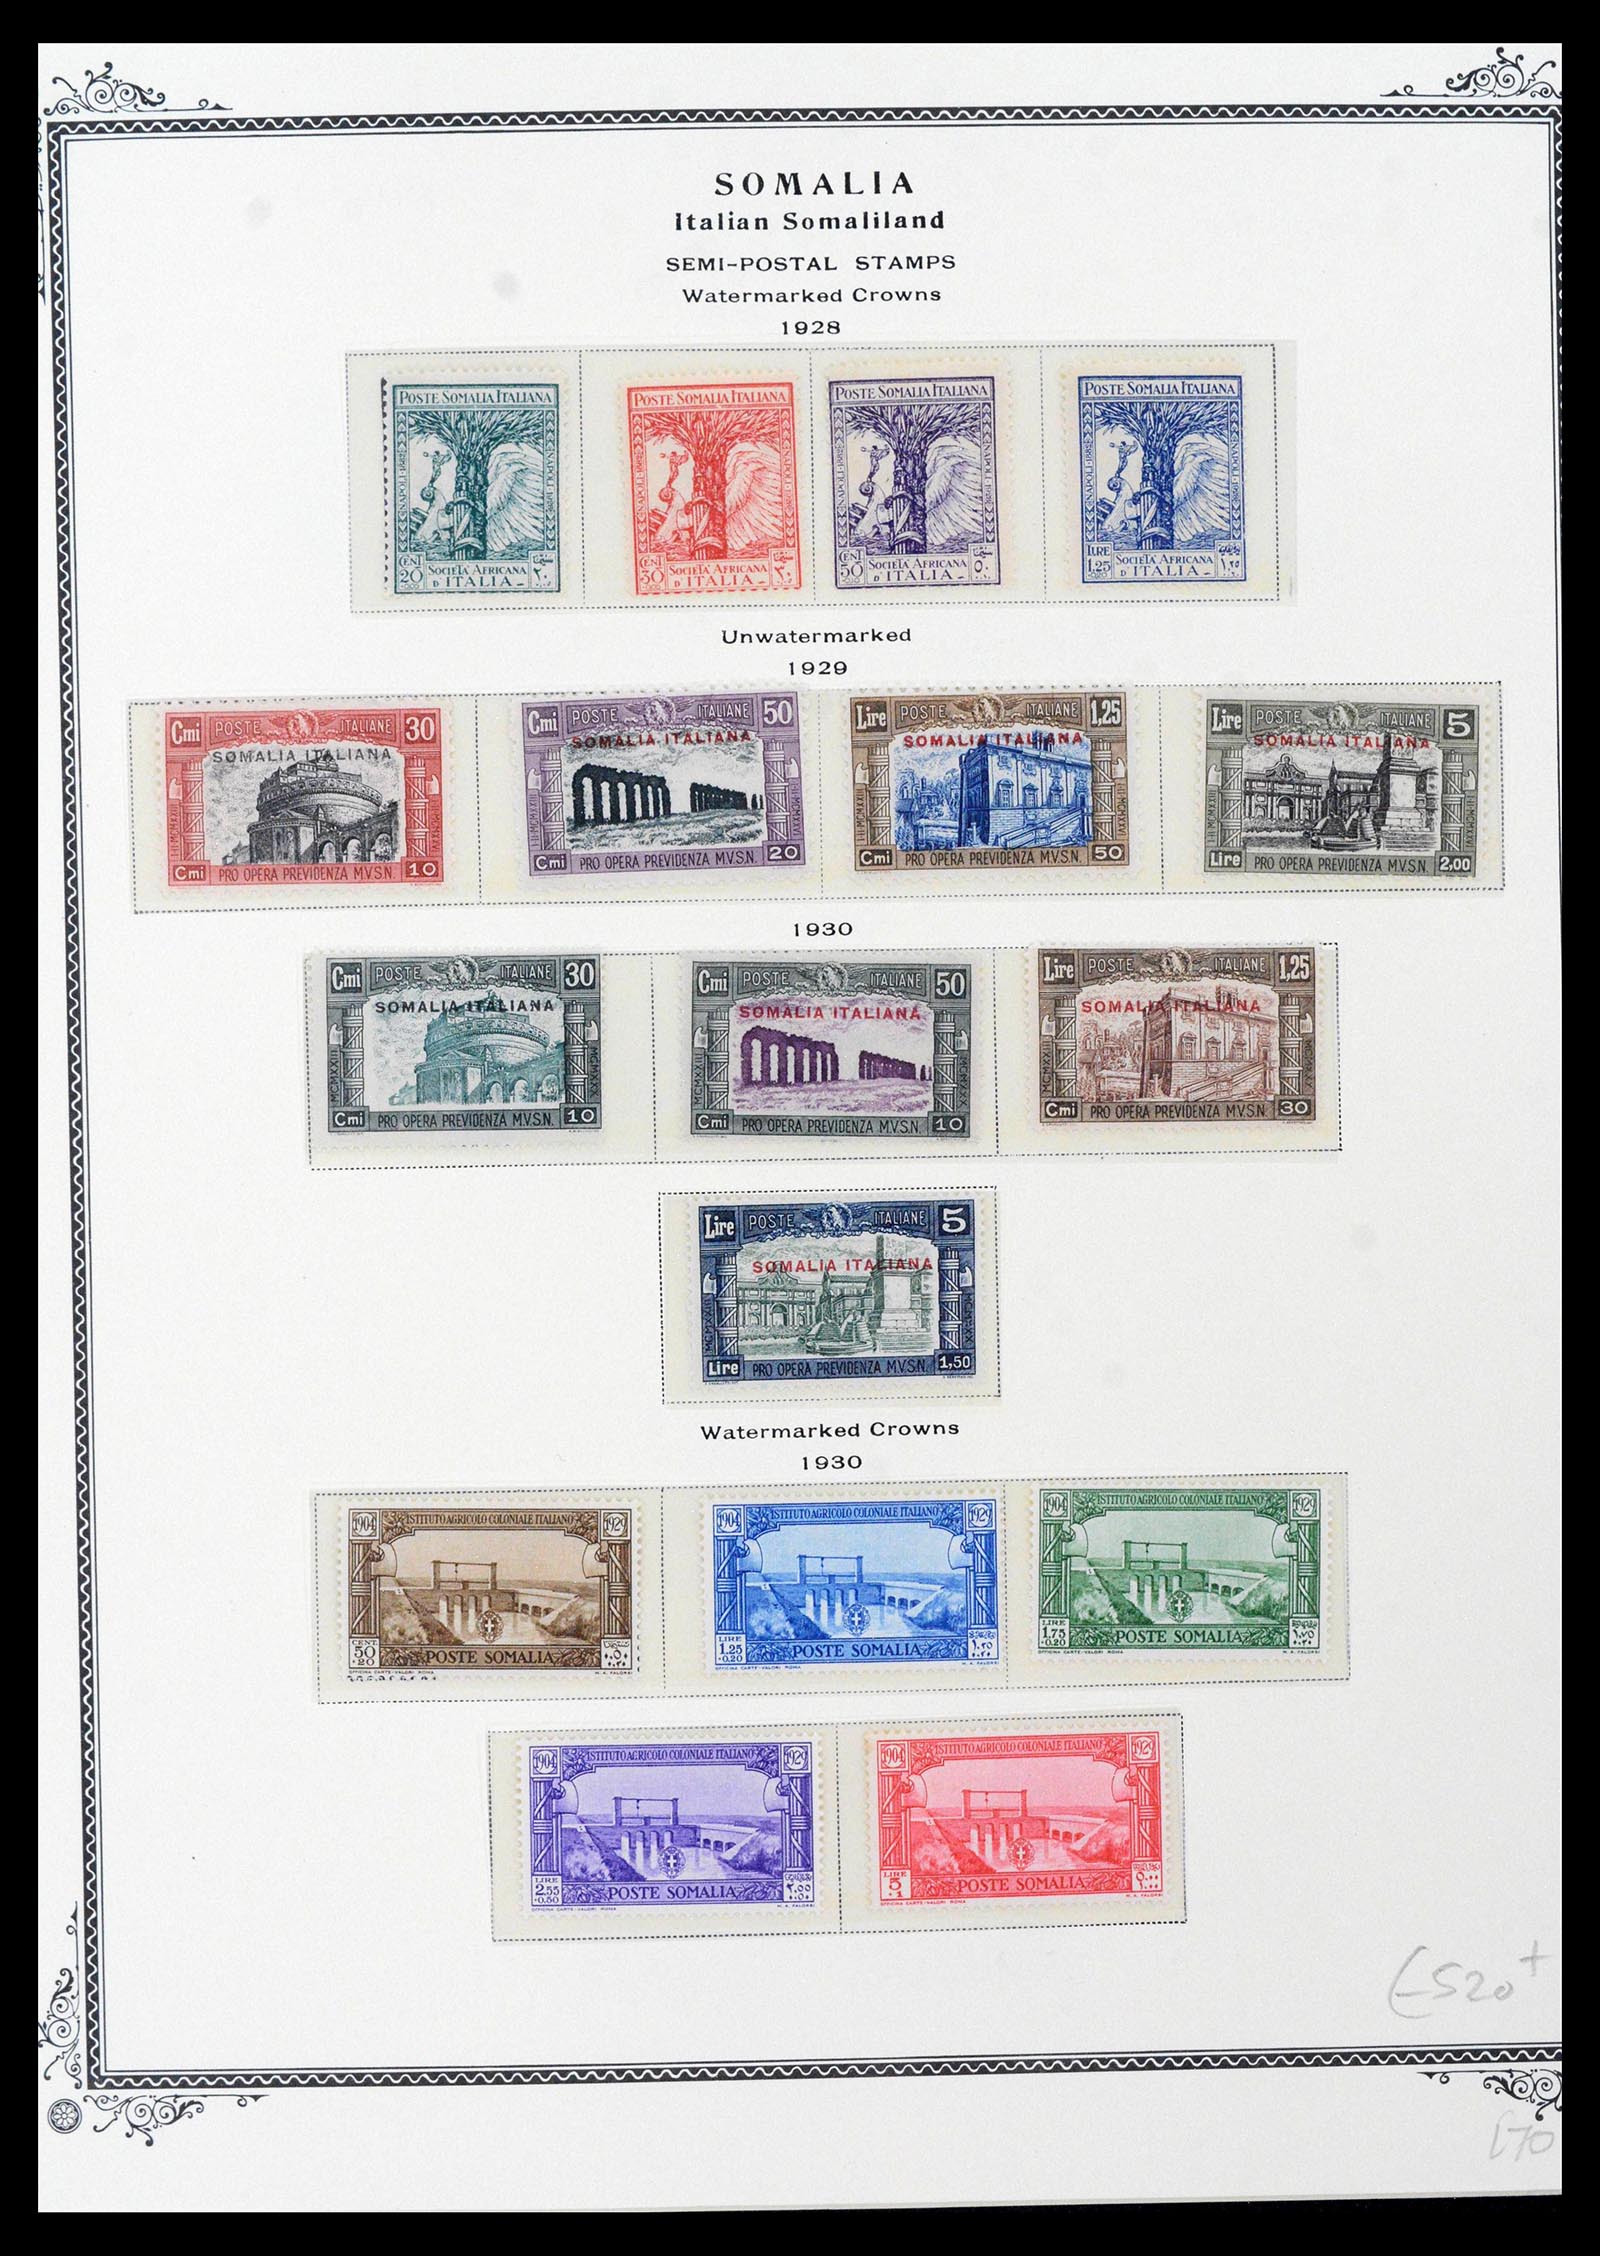 39011 0027 - Stamp collection 39011 Somalia complete 1903-1960.